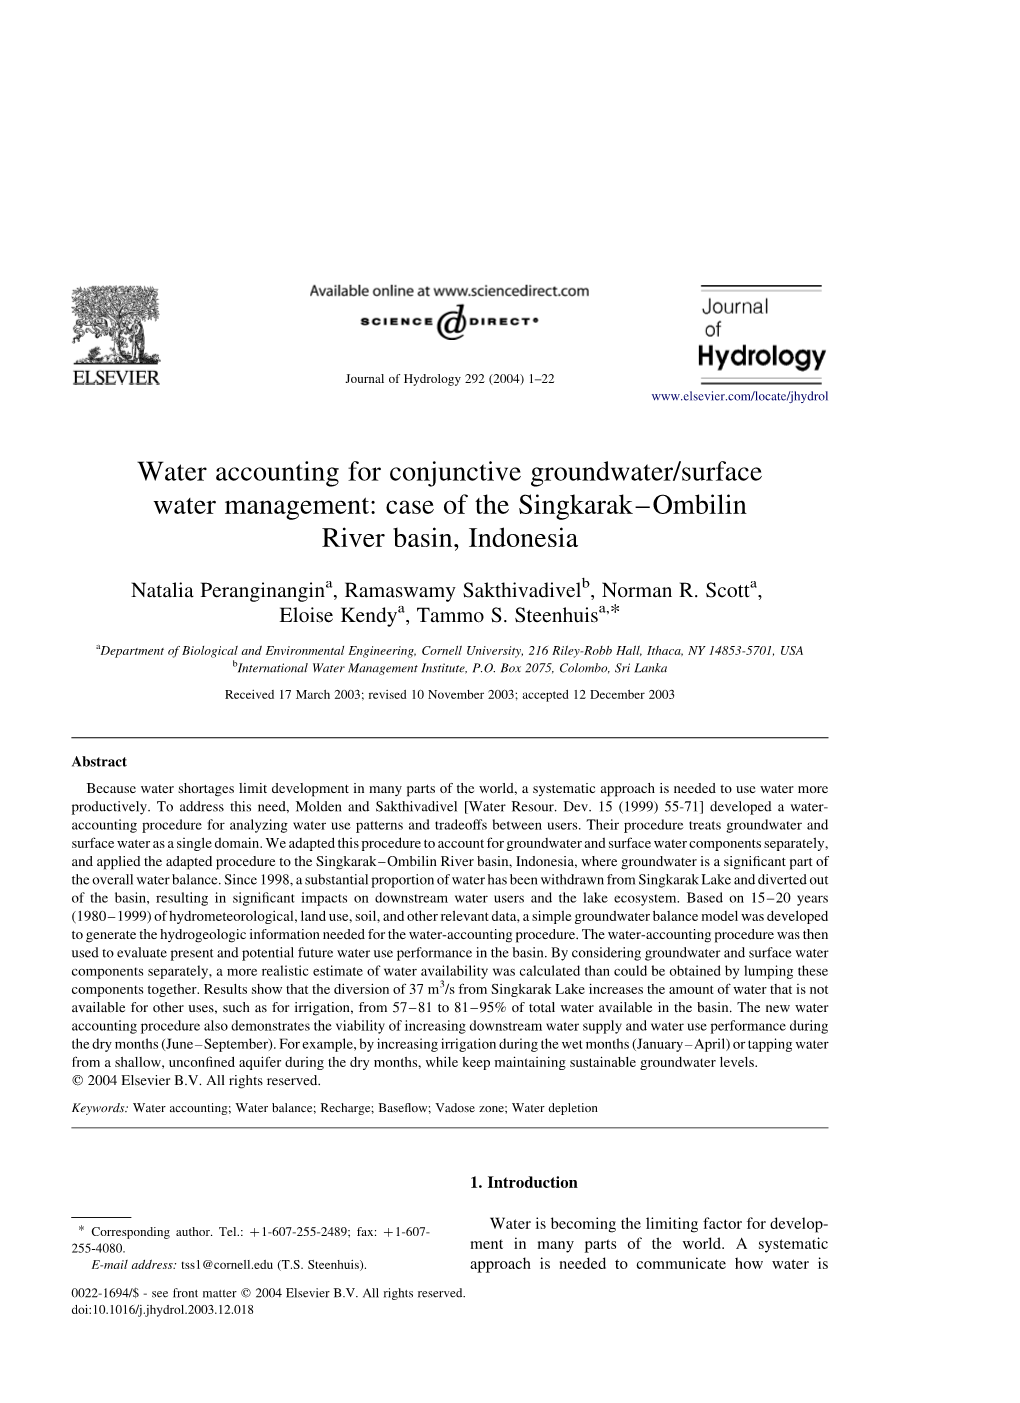 Water Accounting for Conjunctive Groundwater/Surface Water Management: Case of the Singkarak–Ombilin River Basin, Indonesia